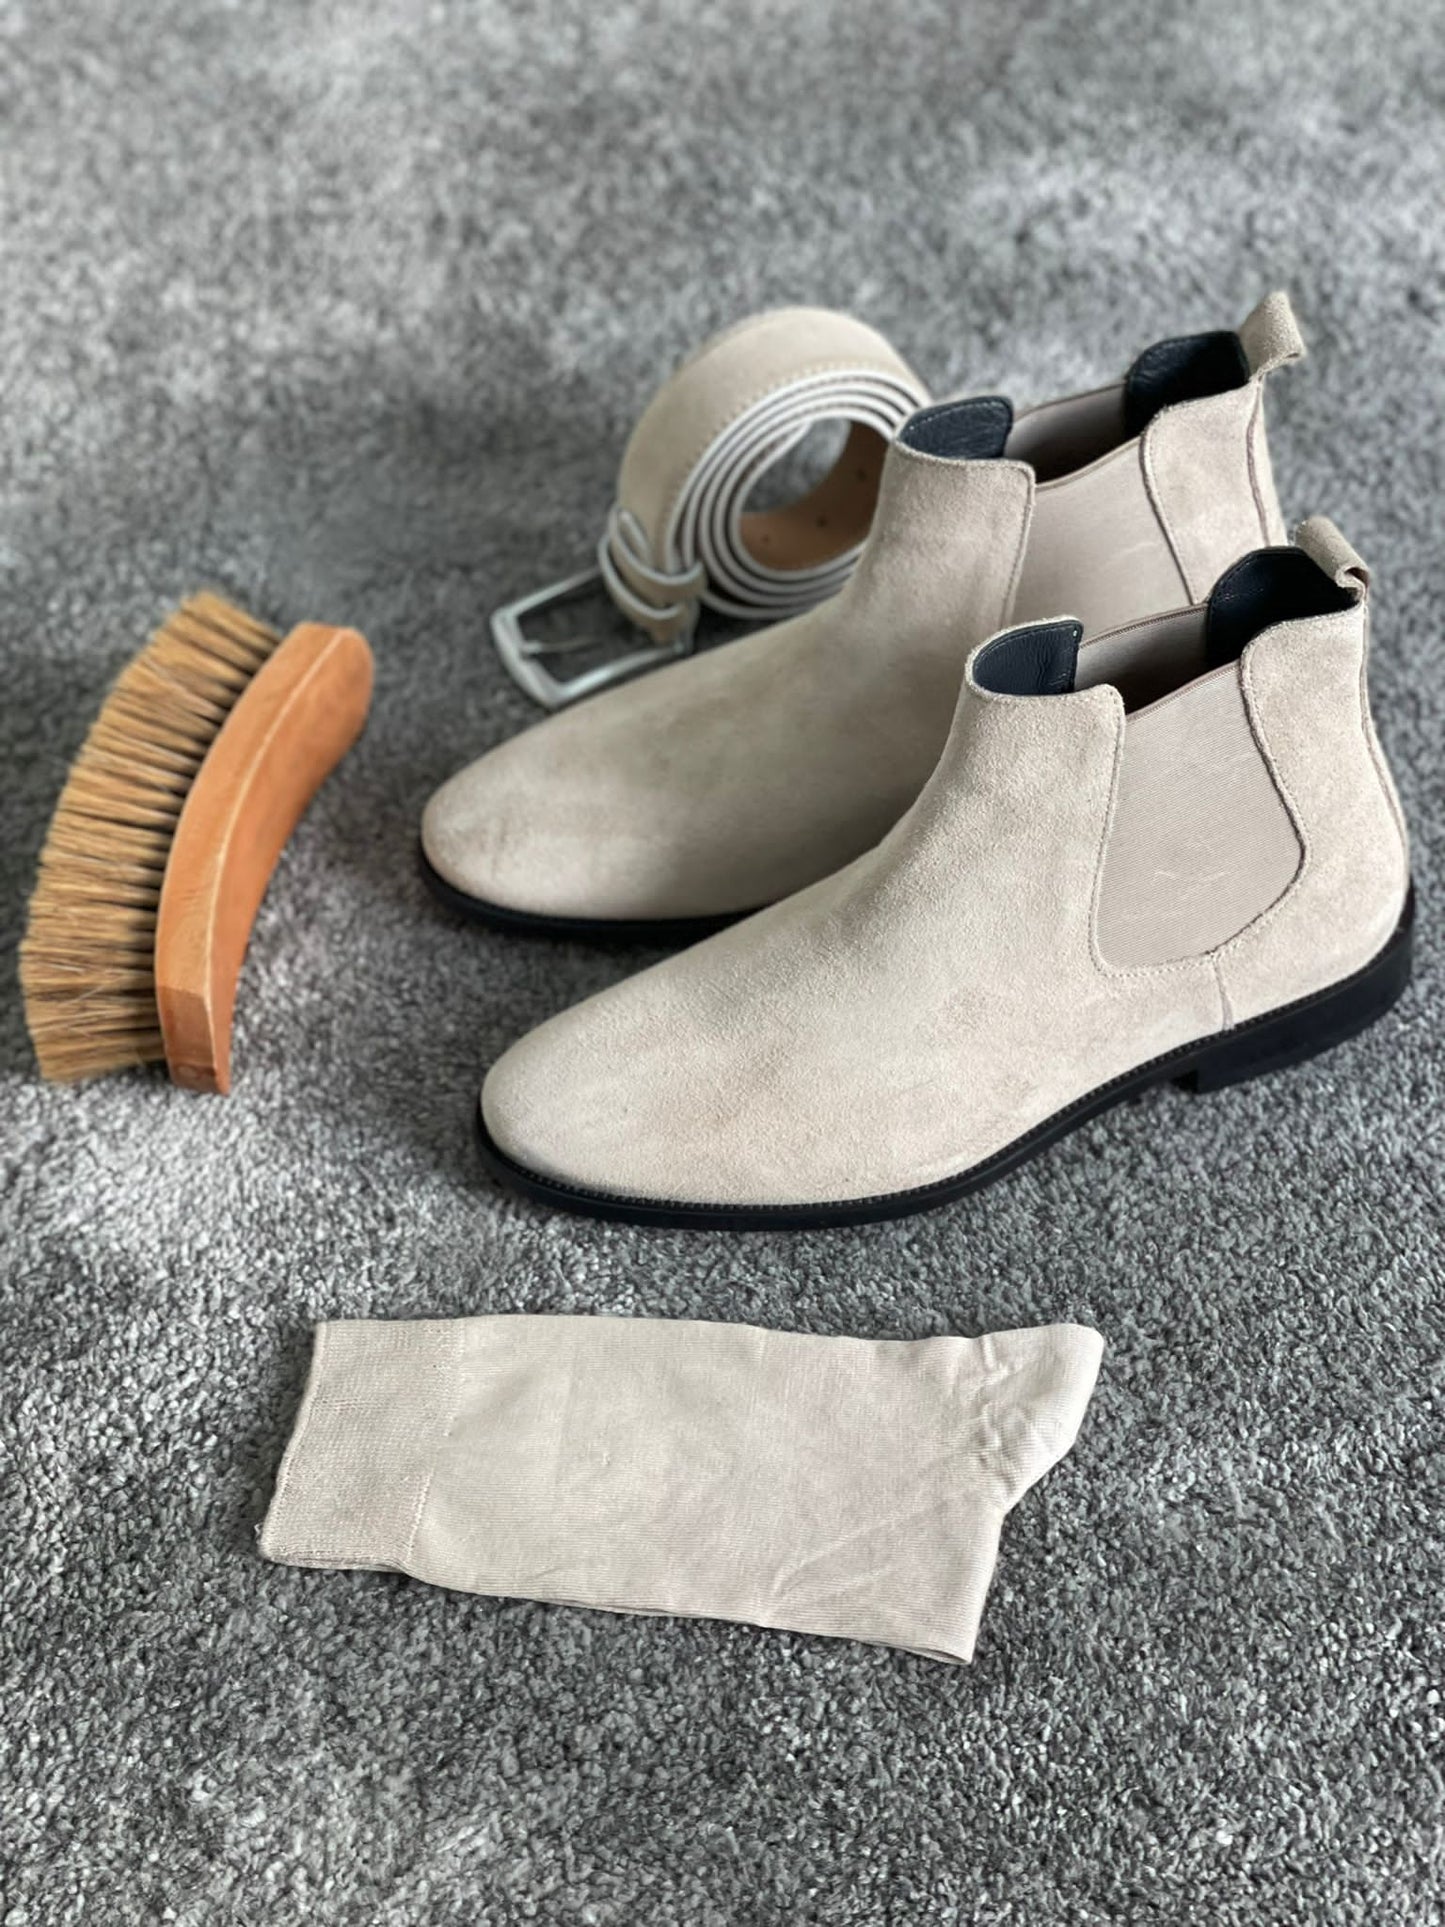 Kingston Stone Suede Leather Chelsea Boots